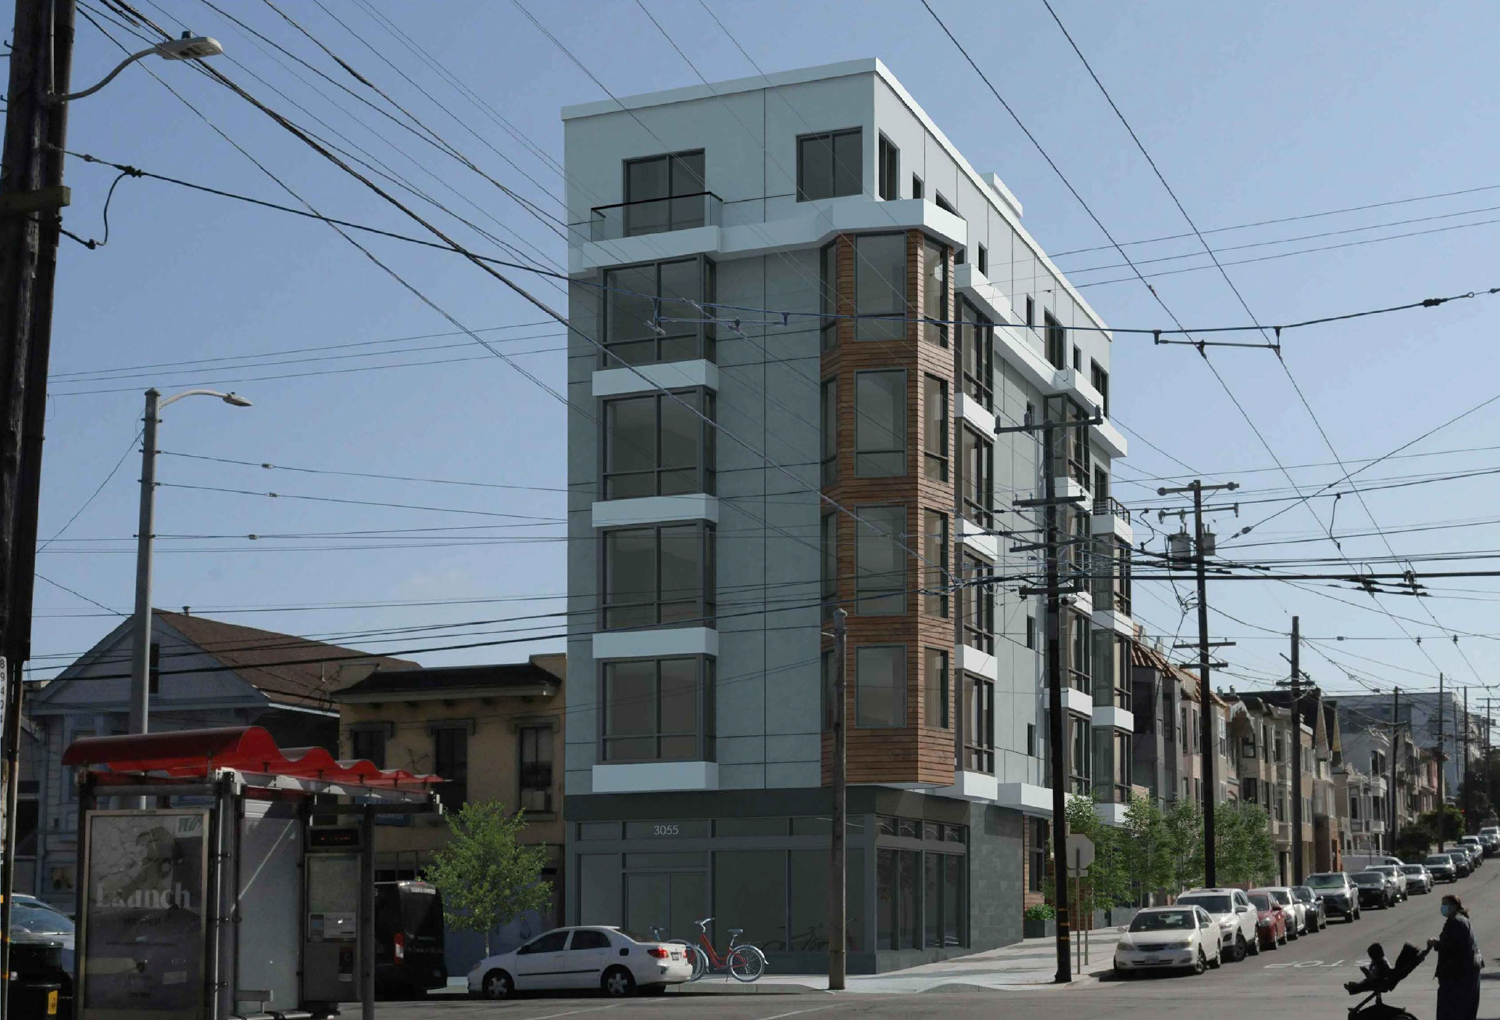 3055 Clement Street overlooking the Clement and 32nd Avenue intersection, rendering by Design Consultants Group